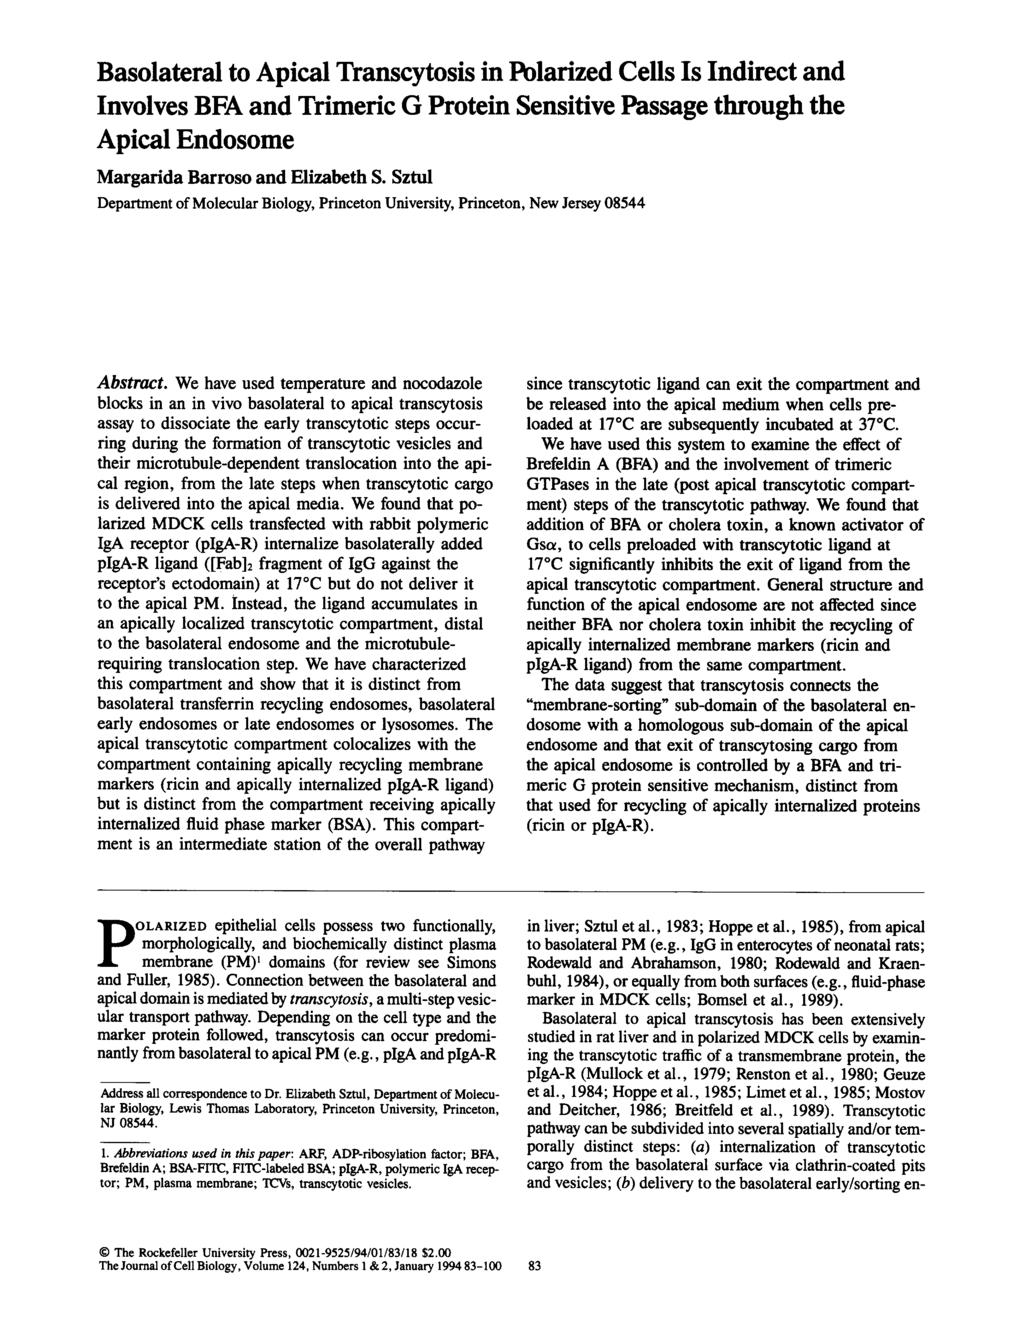 Published Online: 1 January, 1994 Supp Info: http://doi.org/10.1083/jcb.124.1.83 Downloaded from jcb.rupress.